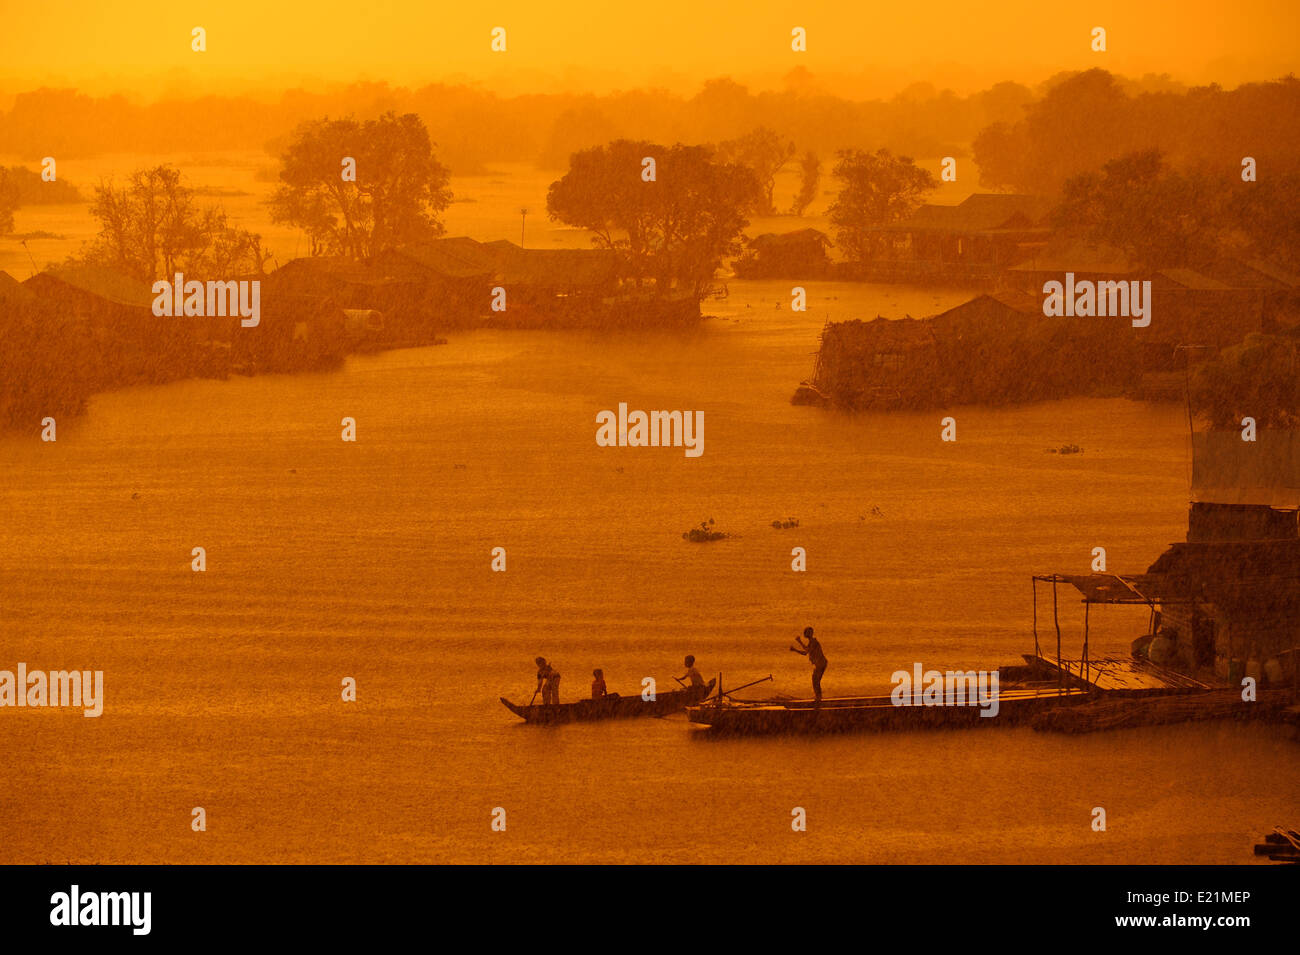 Heavy tropical rain starts as the sun set over a floating village on the Tonle Sap Lake, Cambodia Stock Photo